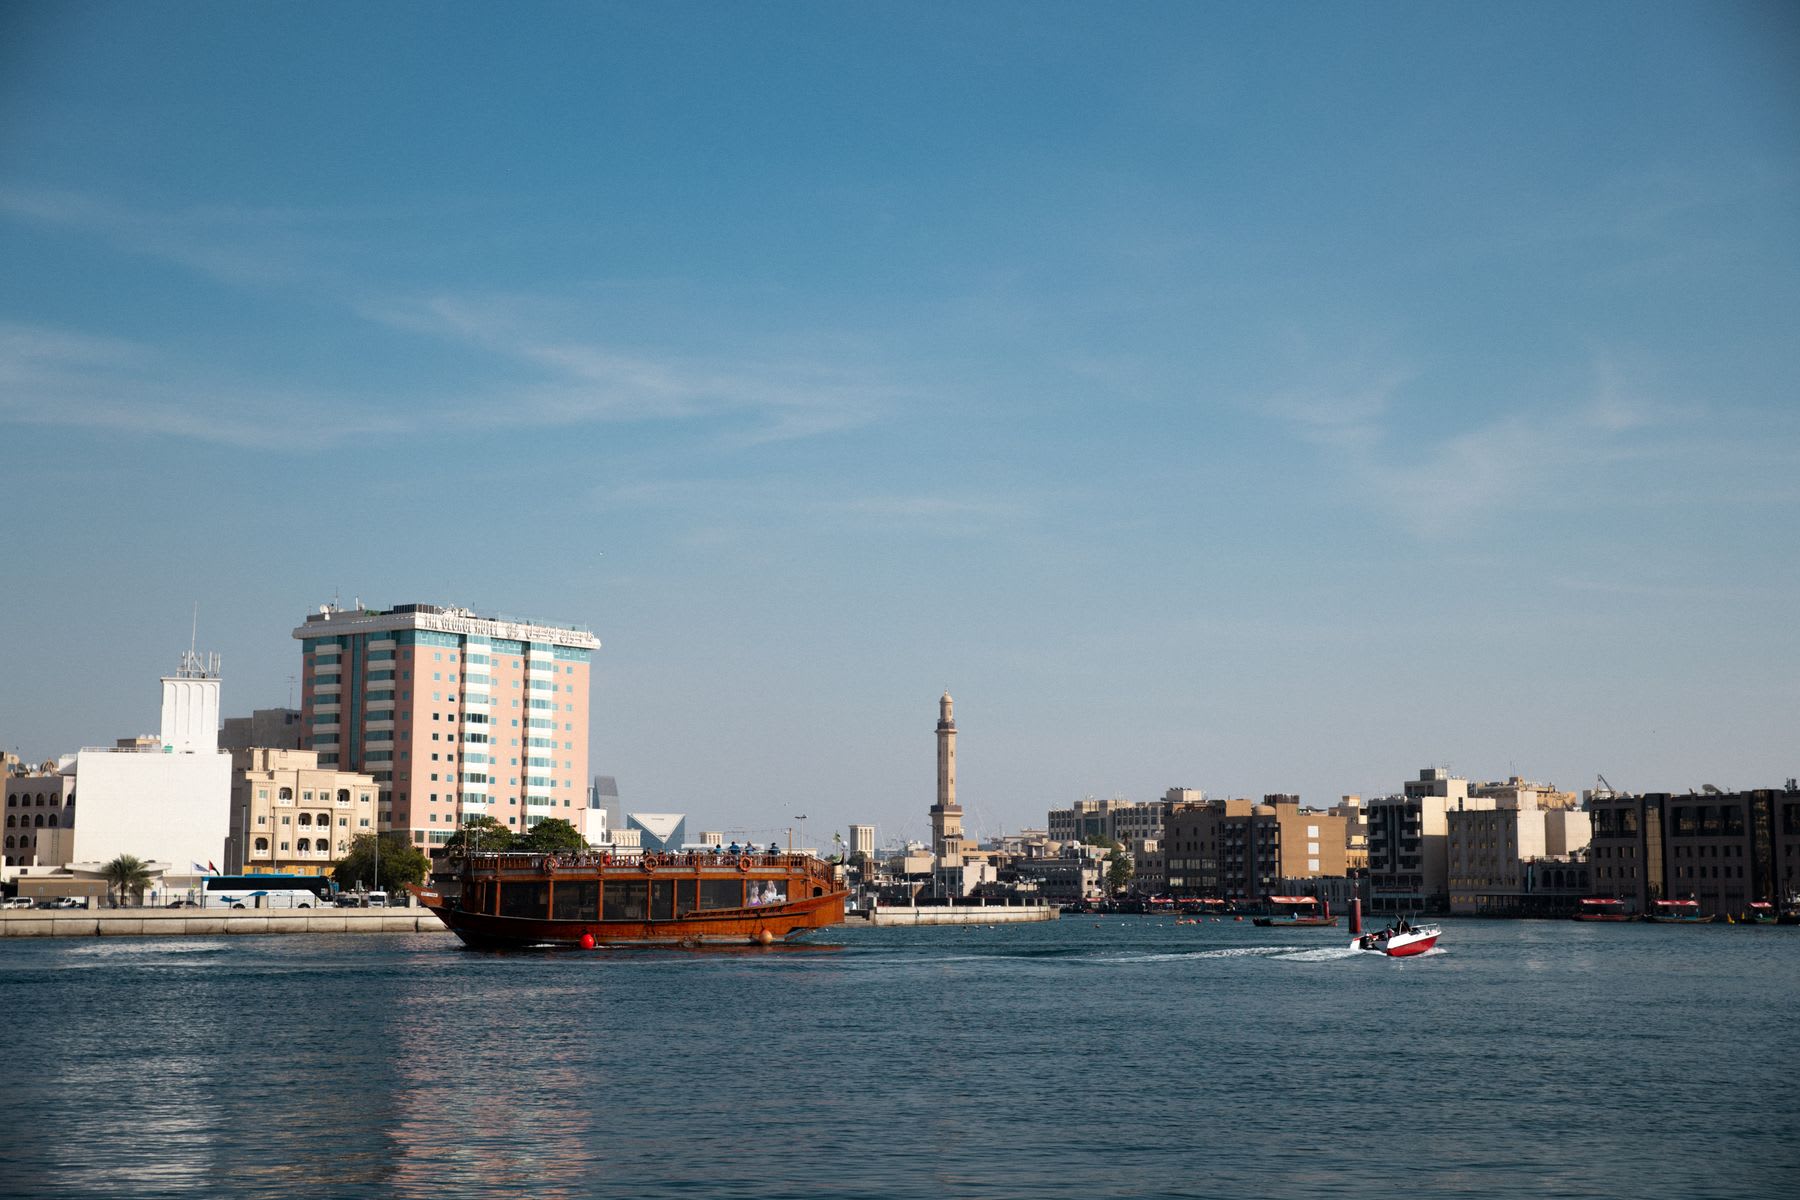 A cityscape with buildings, a wooden boat and a speedboat under a blue sky